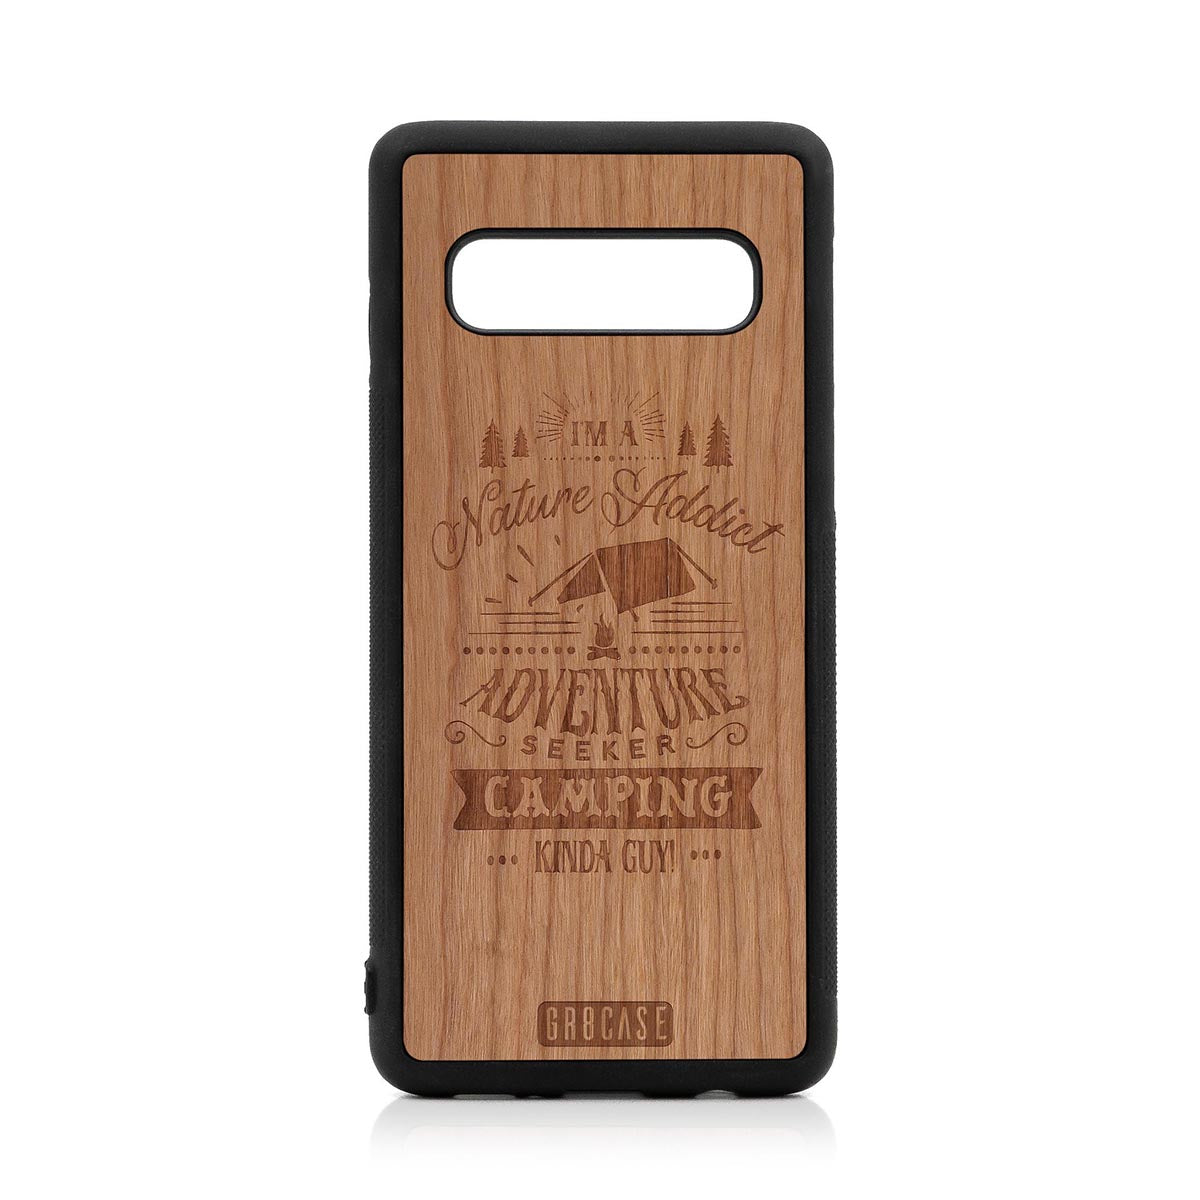 I'm A Nature Addict Adventure Seeker Camping Kinda Guy Design Wood Case For Samsung Galaxy S10 by GR8CASE